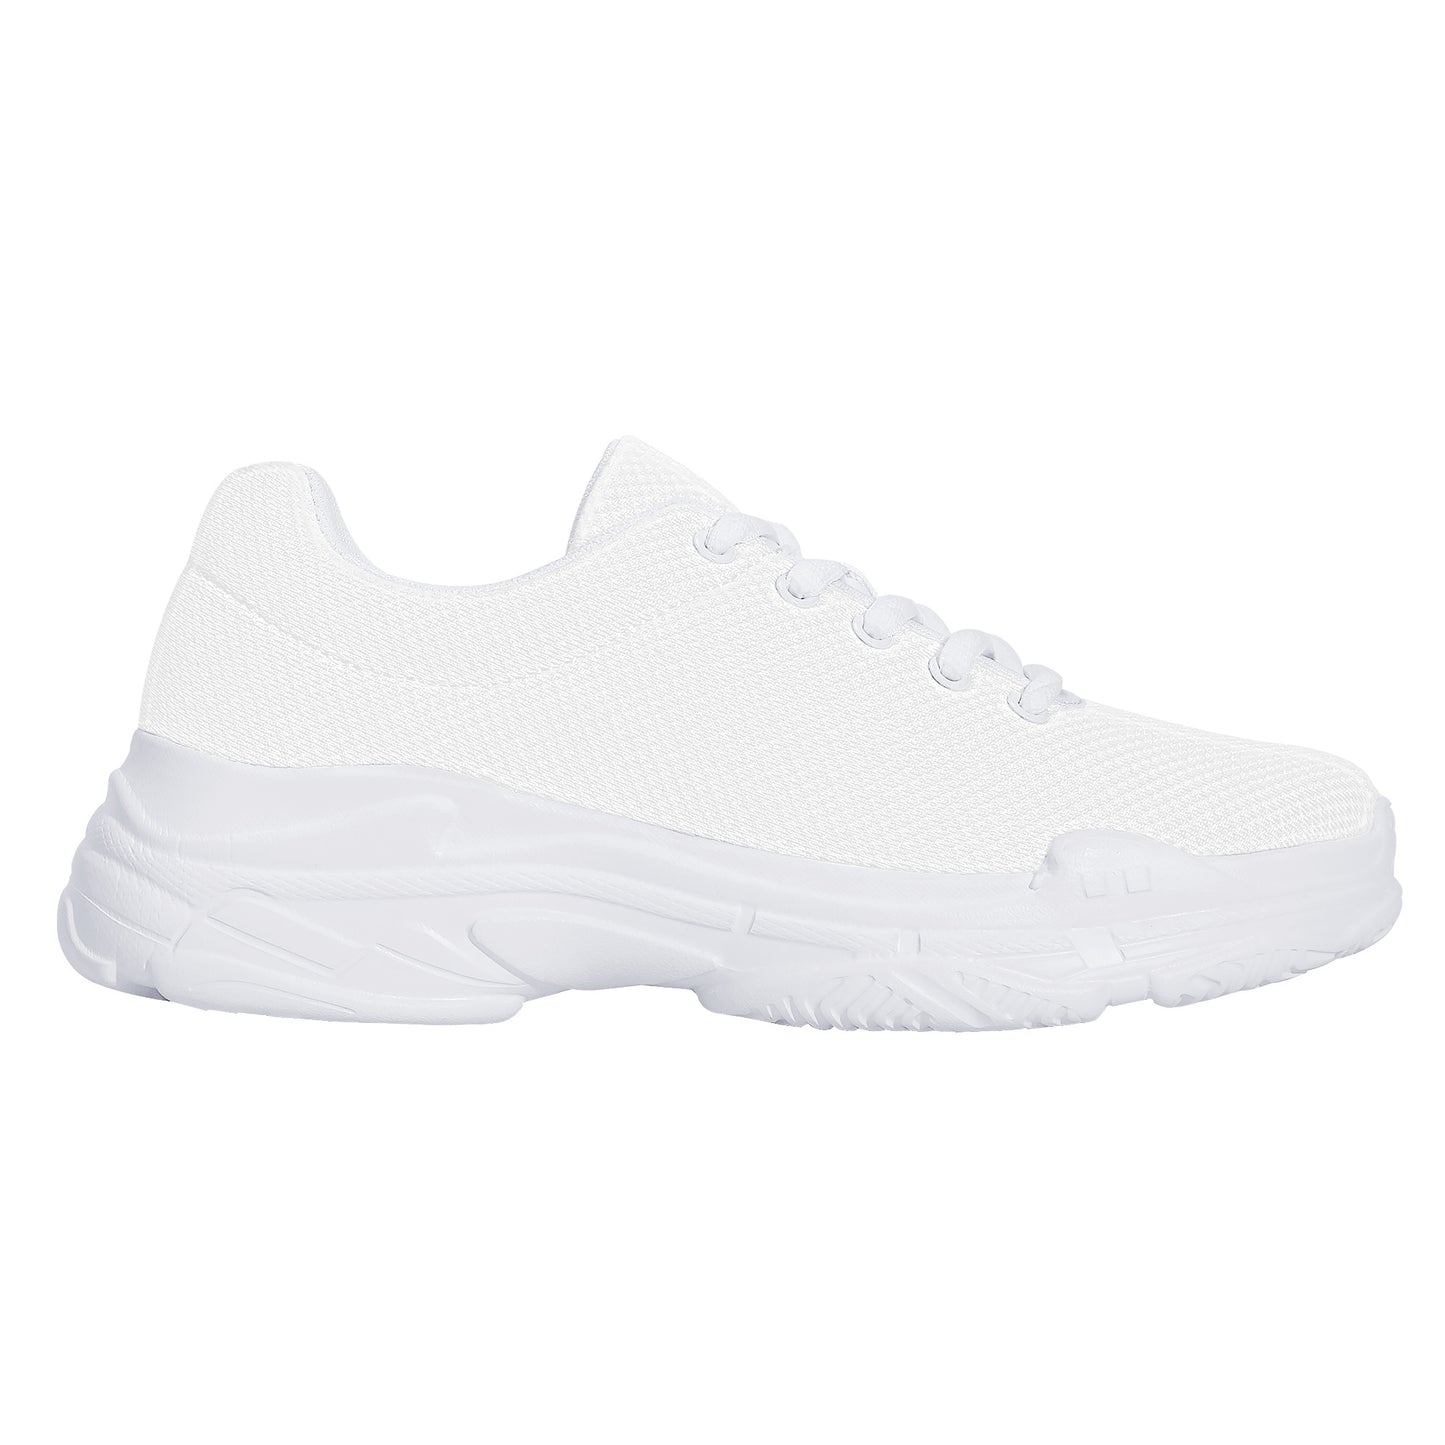 Create Your Own - Chunky Sneakers - White